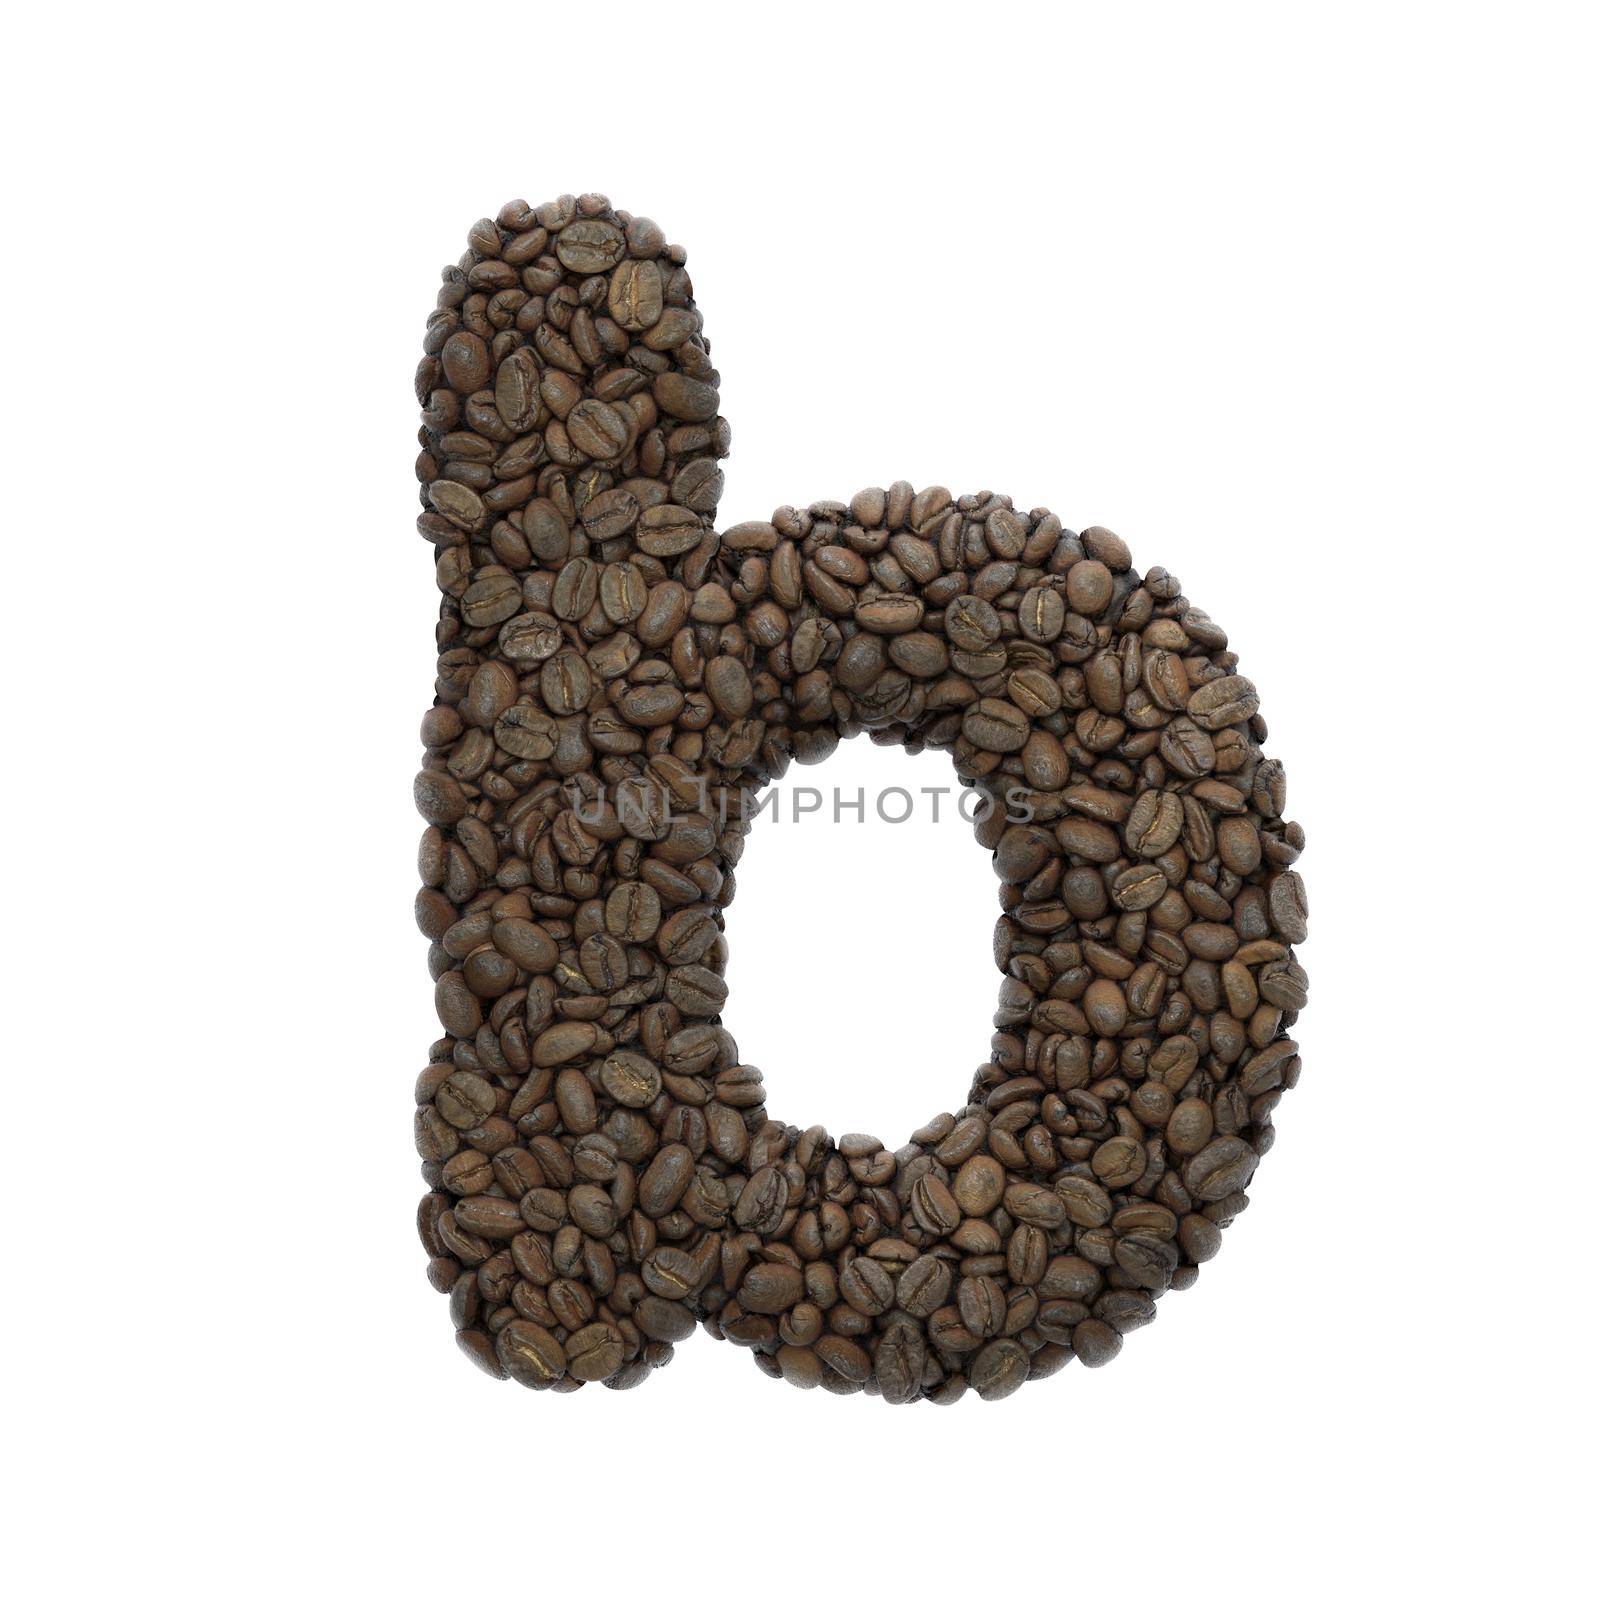 Coffee letter B - Small 3d roasted beans font isolated on white background. This alphabet is perfect for creative illustrations related but not limited to Coffee, energy, insomnia...